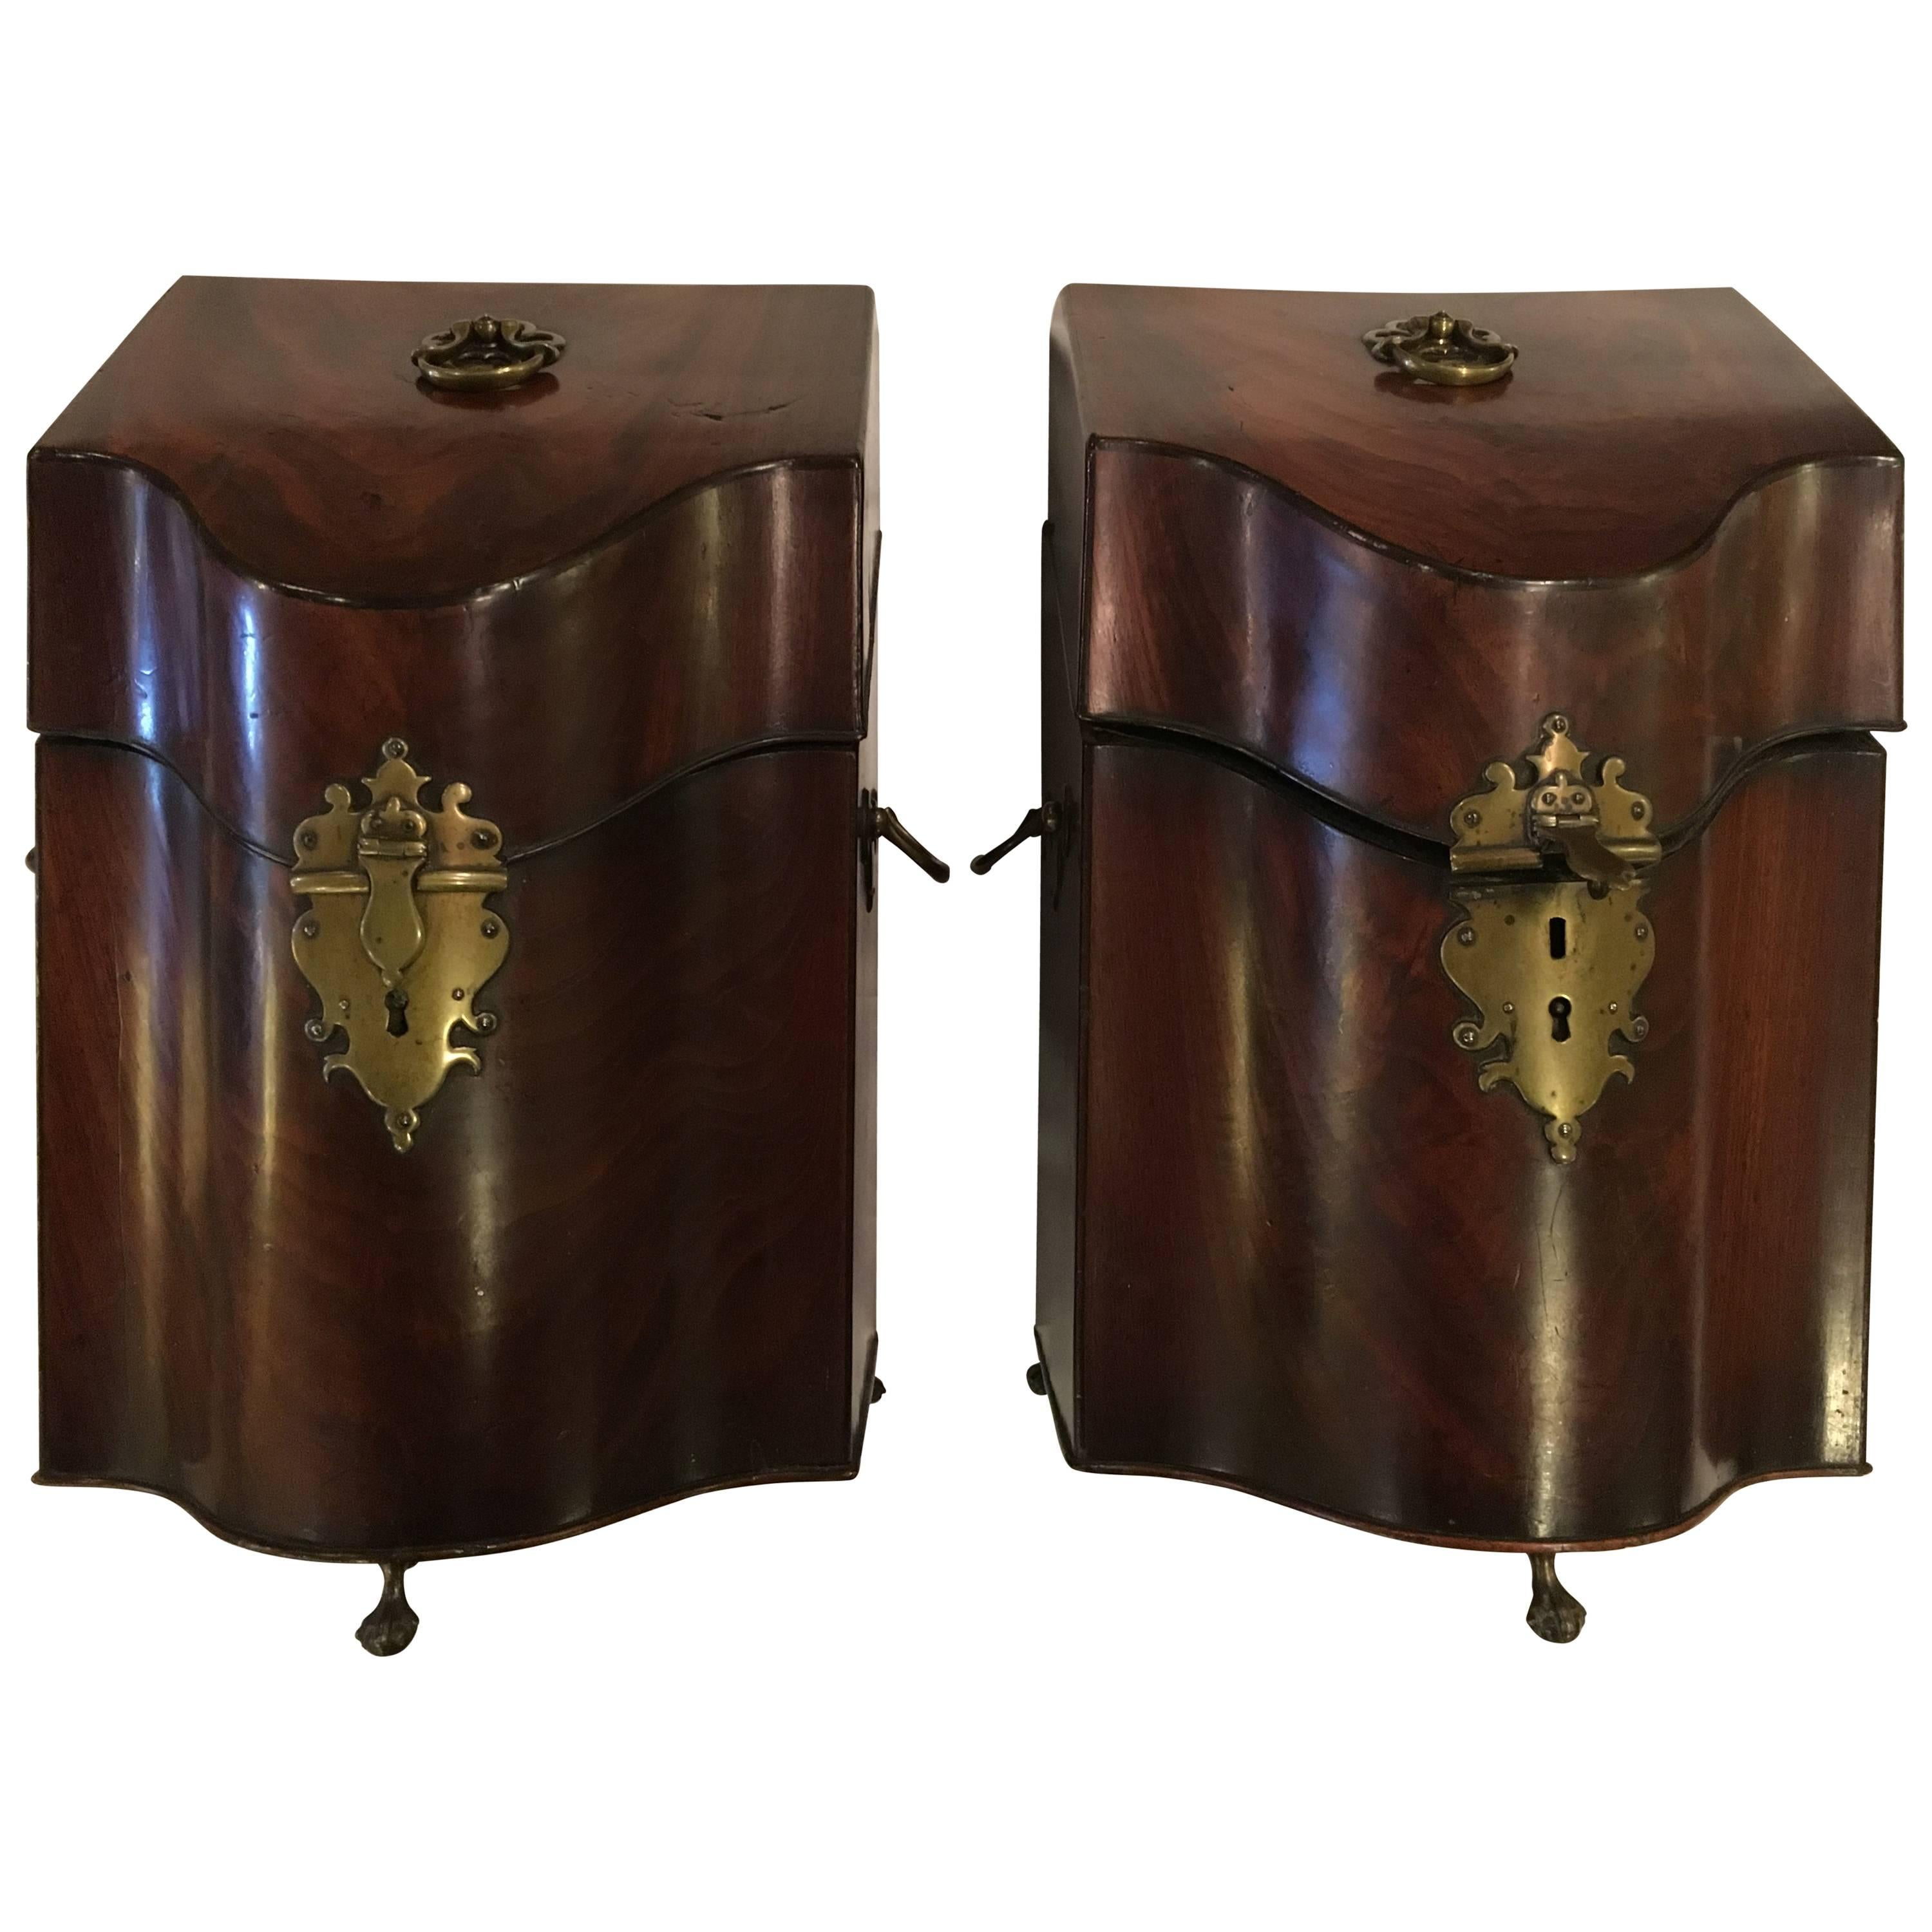 Pair of 18th Century Mahogany Knife Boxes with Fitted Interiors